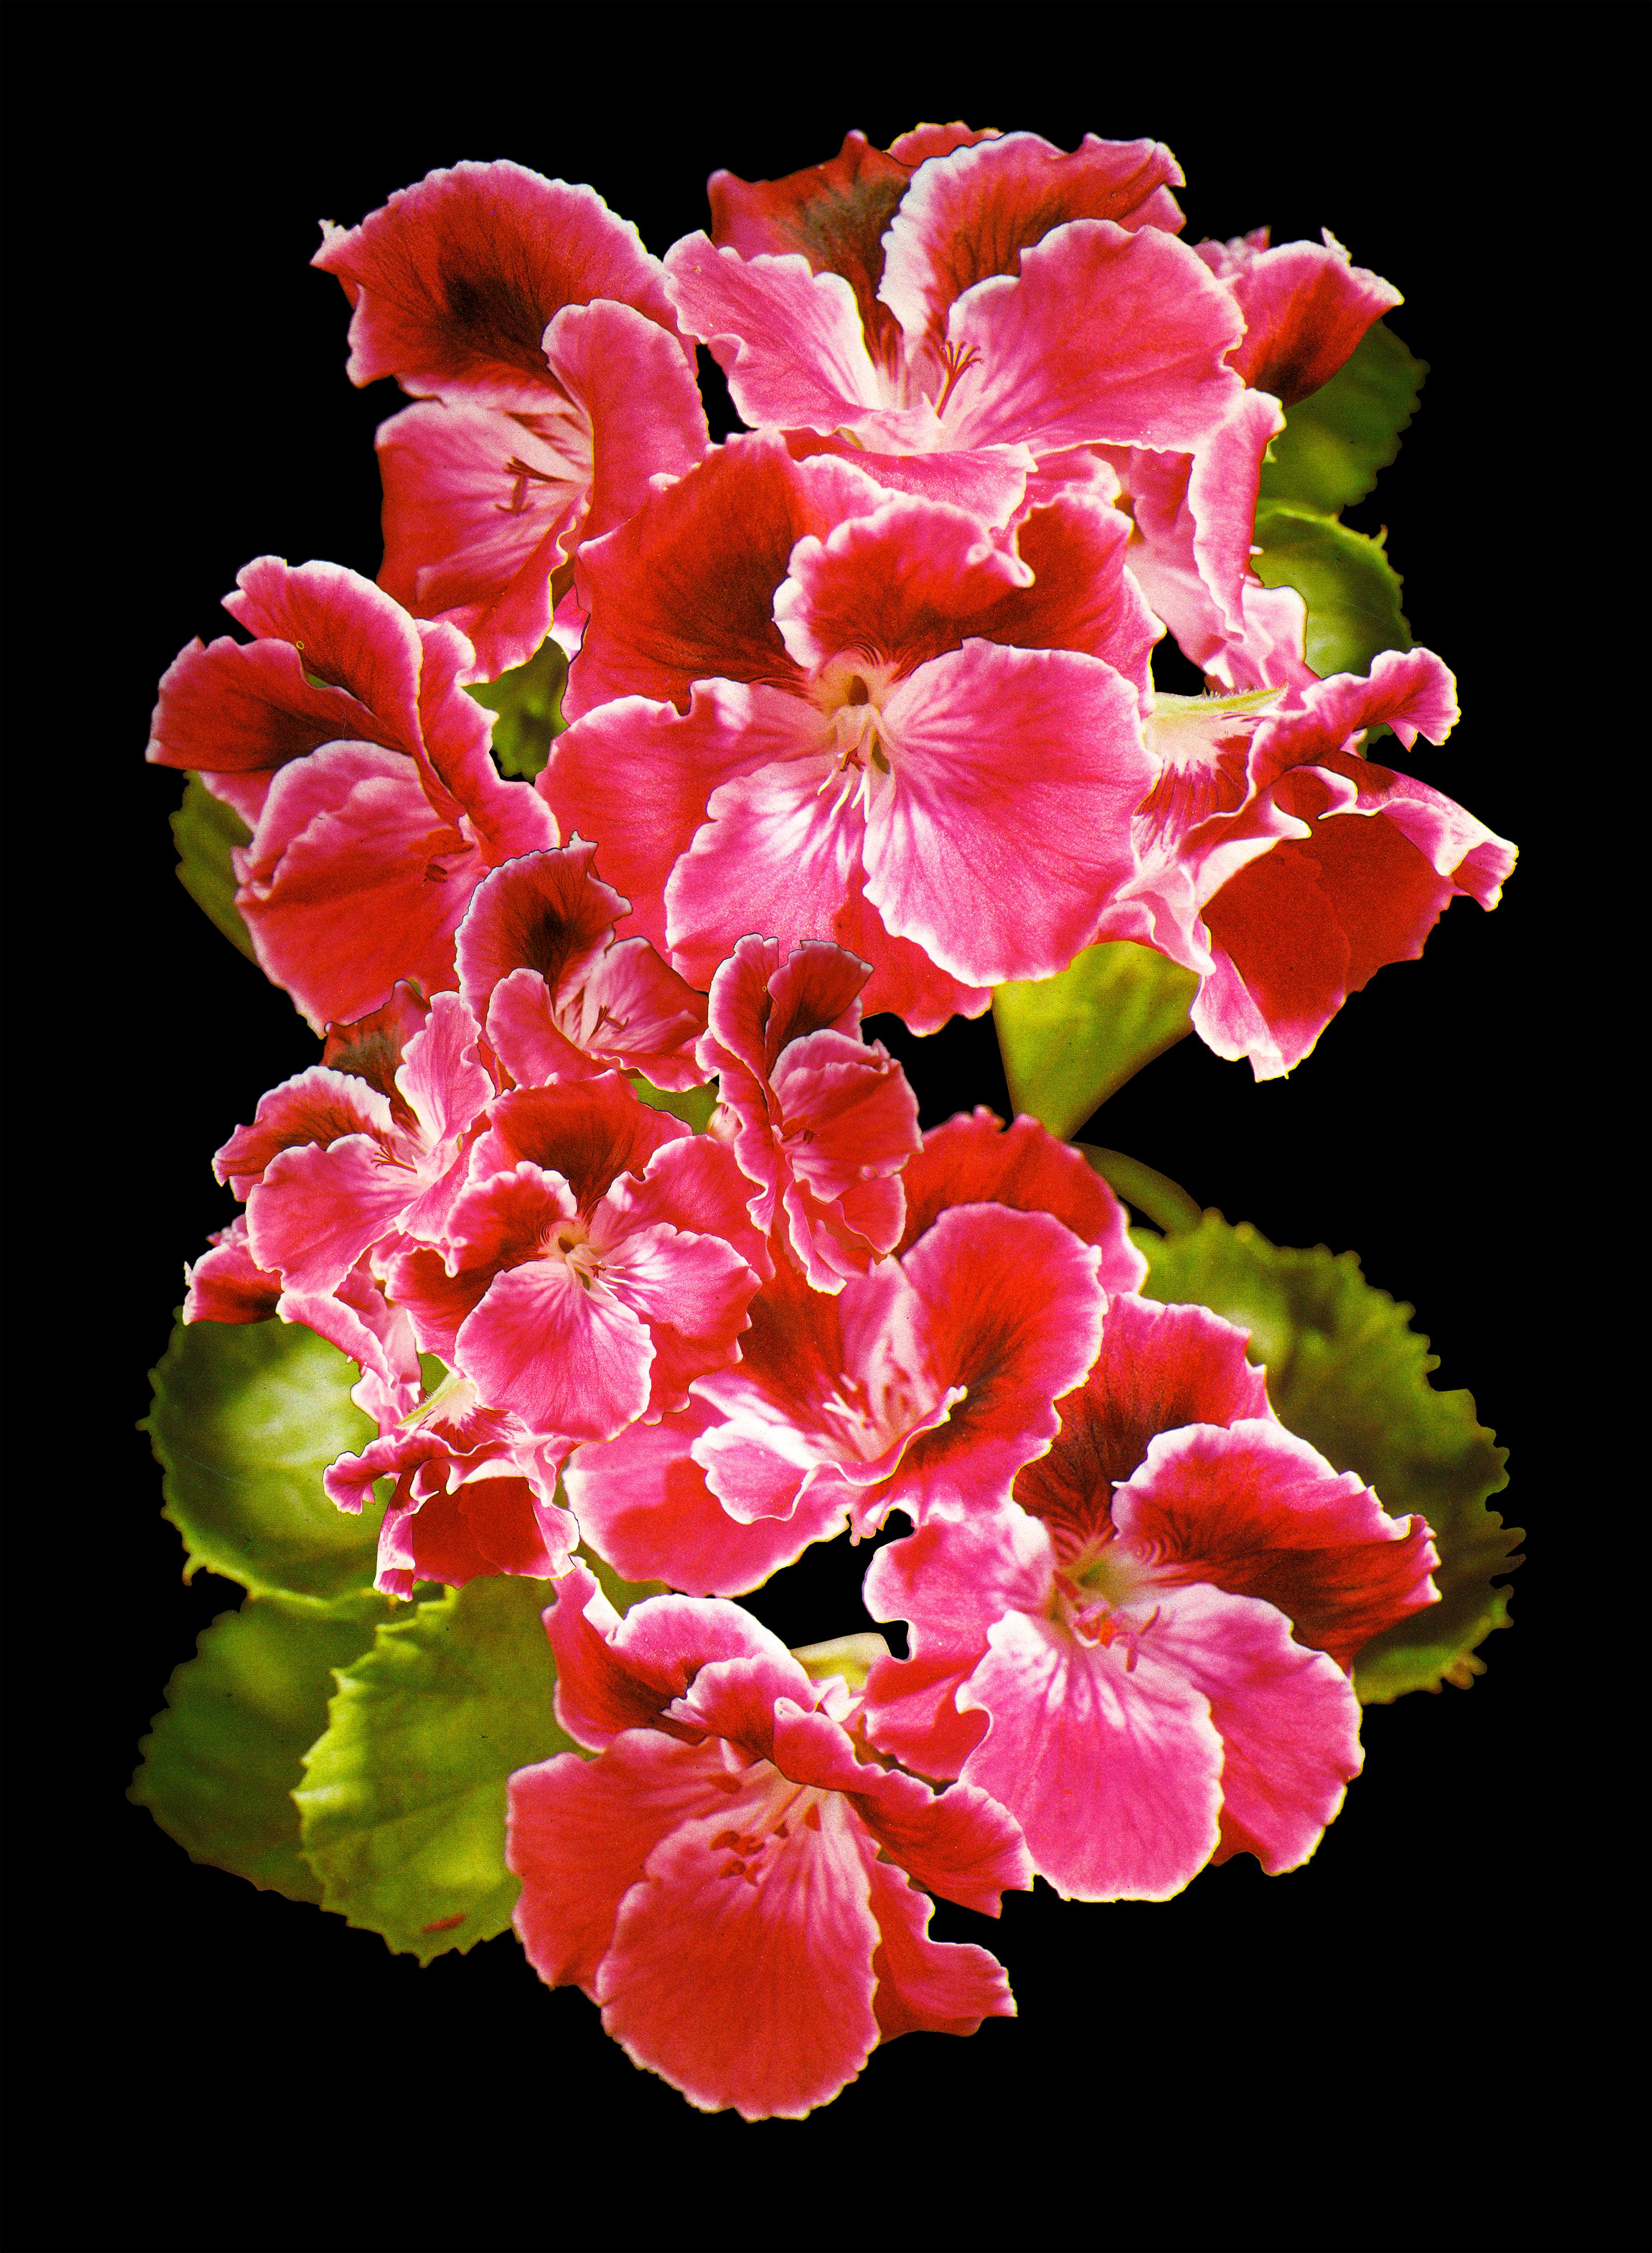 Big Pink (Black Background) - contemporary photo of vibrant flower (11 x 15) - Print by Laura Kay Keeling 